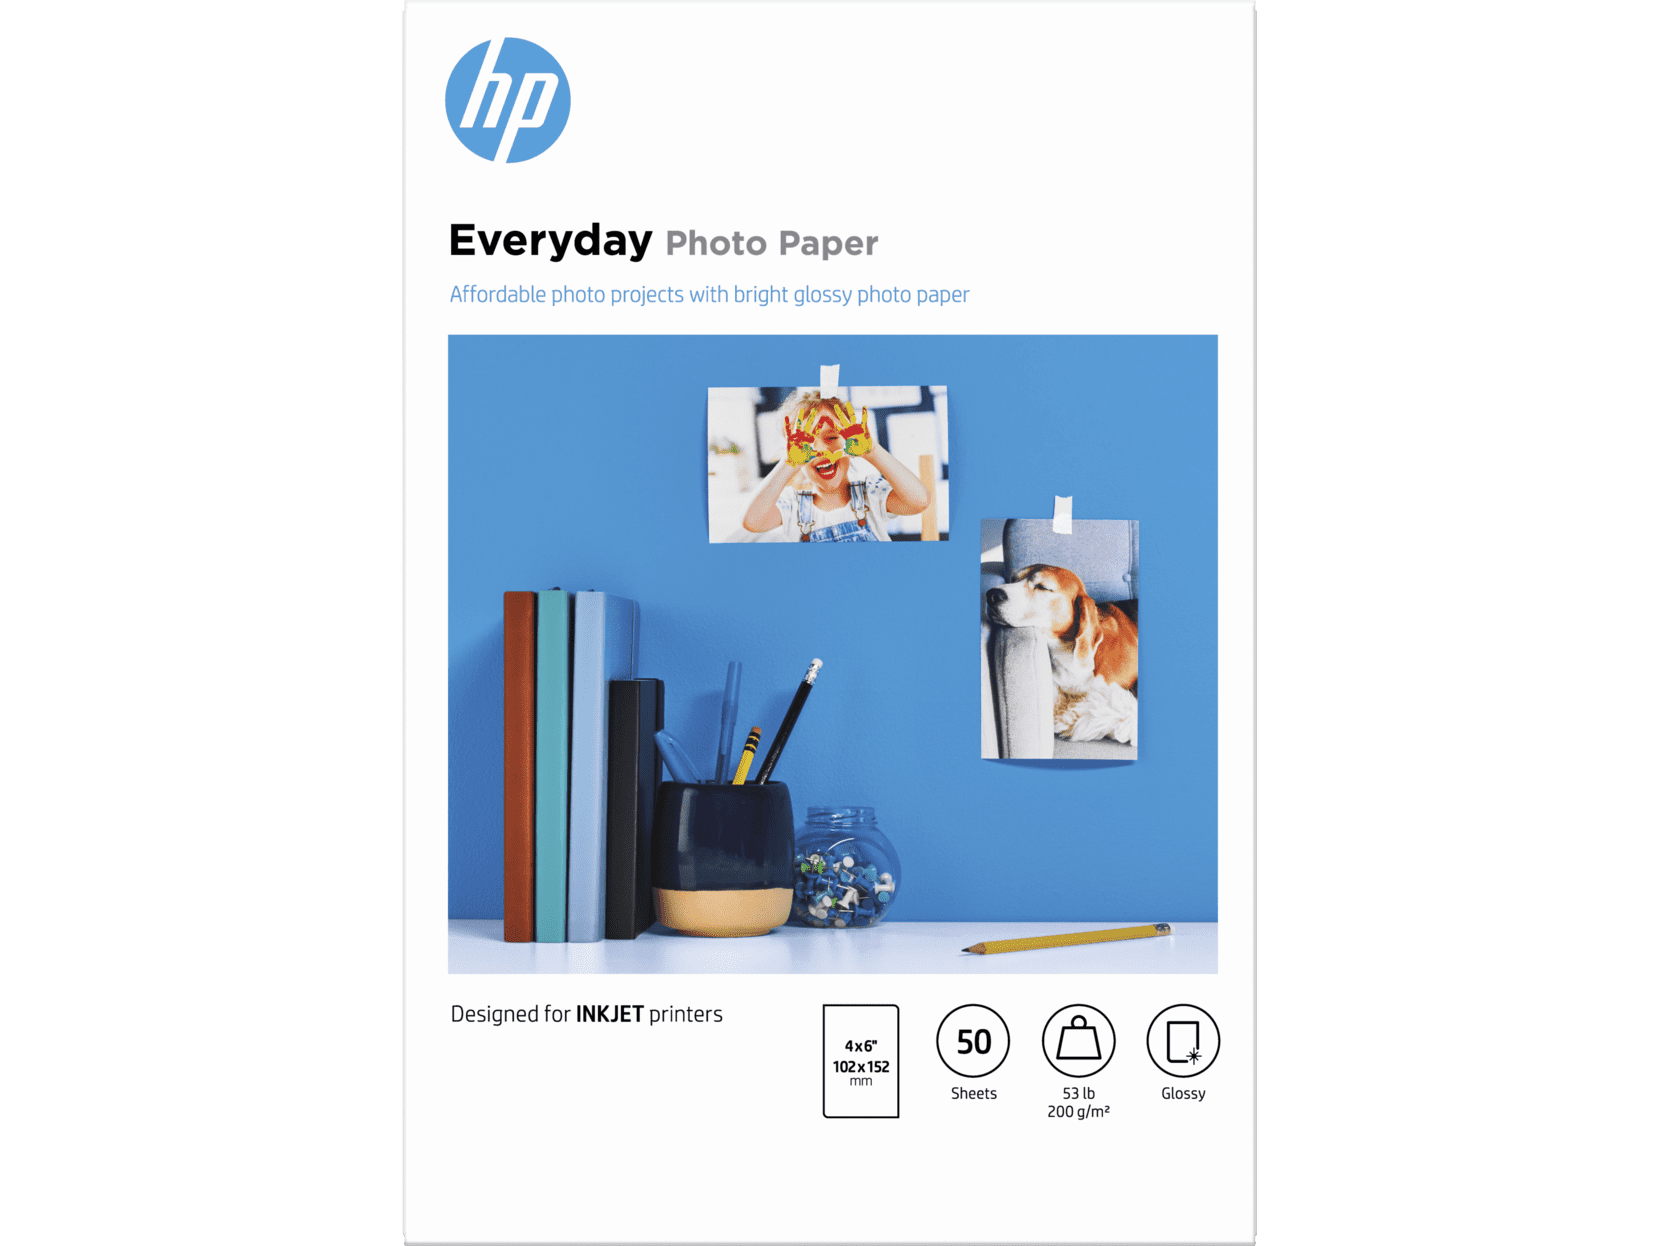 HP Everyday Photo Paper - Glossy - 8 mil - 4 in x 6 in - 200 g/m, 50 sheets photo paper